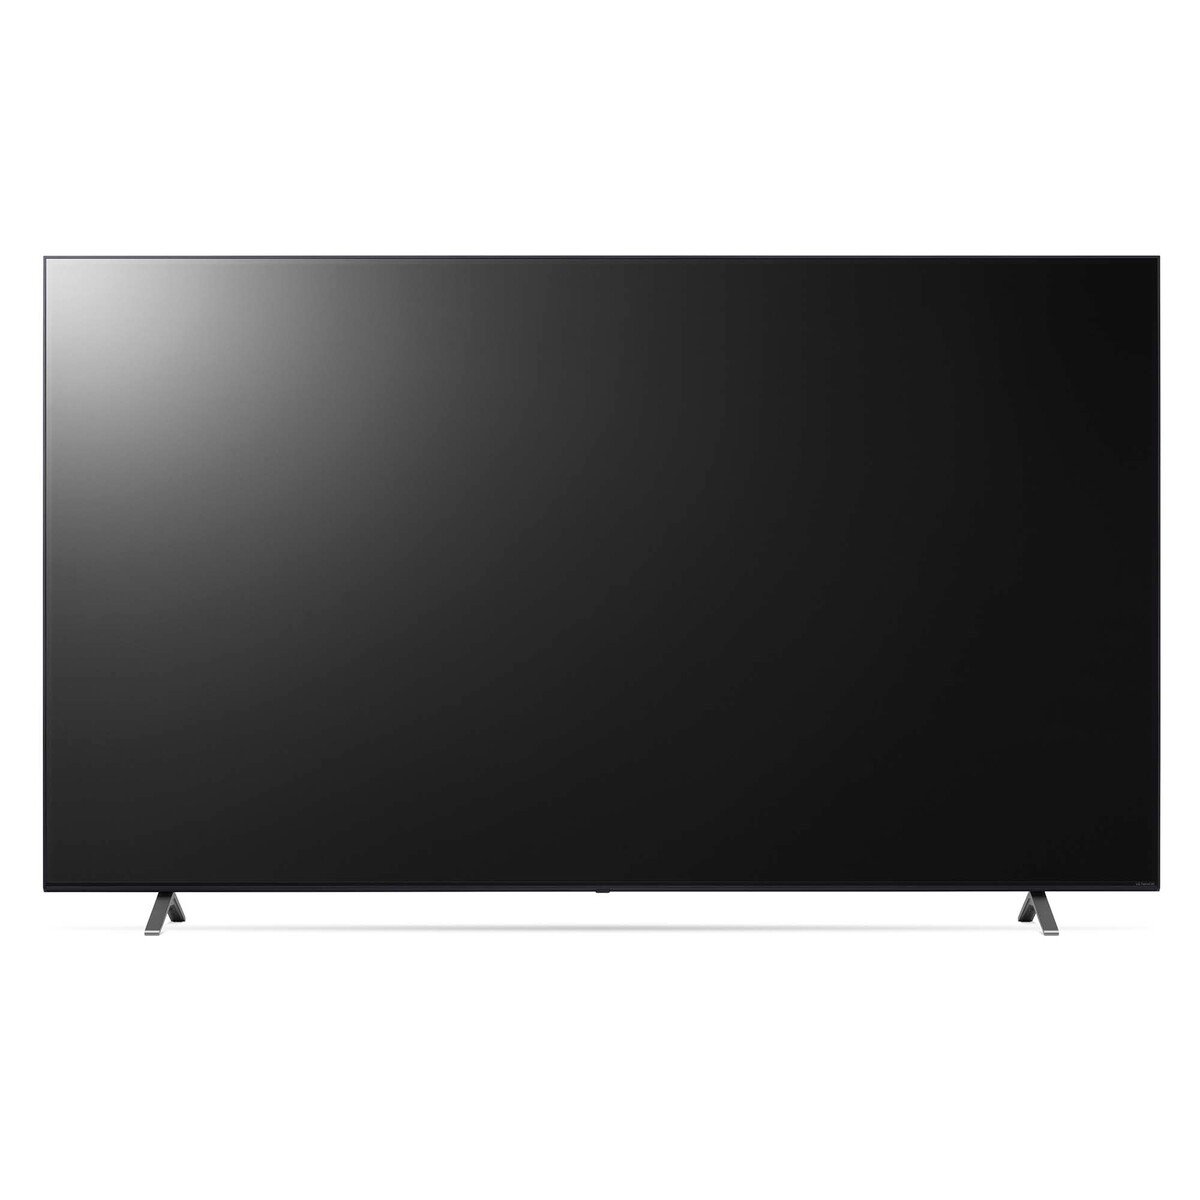 LG NanoCell 4K Smart TV 65 Inch NANO80 Series Cinema Screen Design, New 2021 4K Active HDR webOS Smart with ThinQ AI Local Dimming